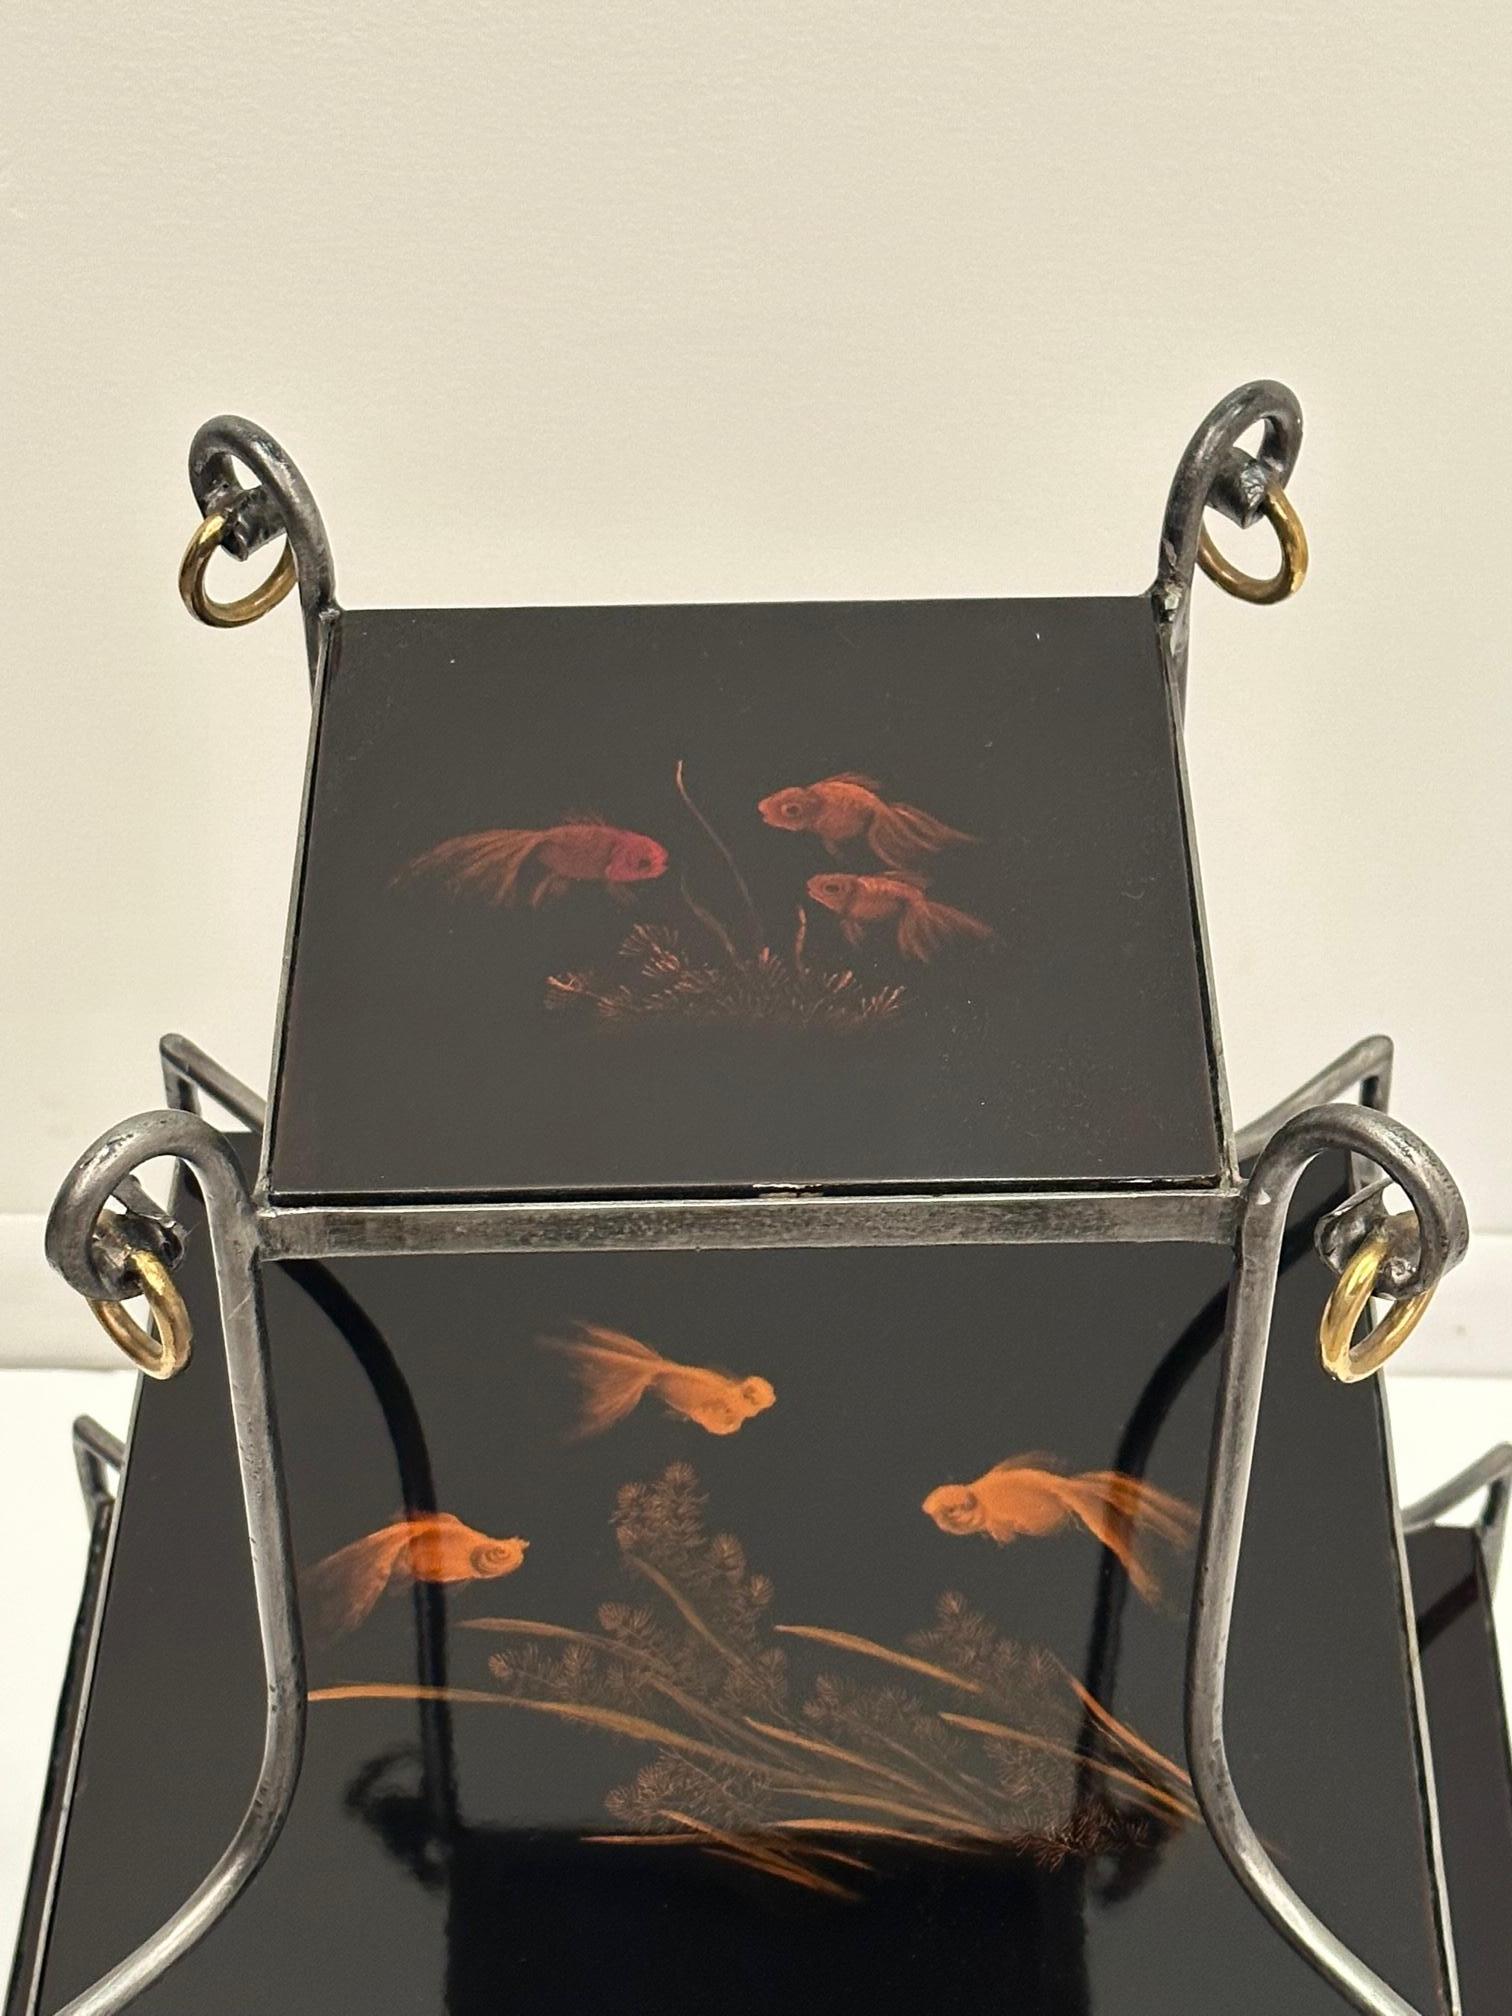 Beautifully designed unusual 3 tier side table having burnished steel and brass form and lovely black lacquer graduated levels of table surfaces decorated with gold fish. Handsome brass rings at the top.
Top shelf 7.2 x 7.5
Middle 13 x 13
Bottom